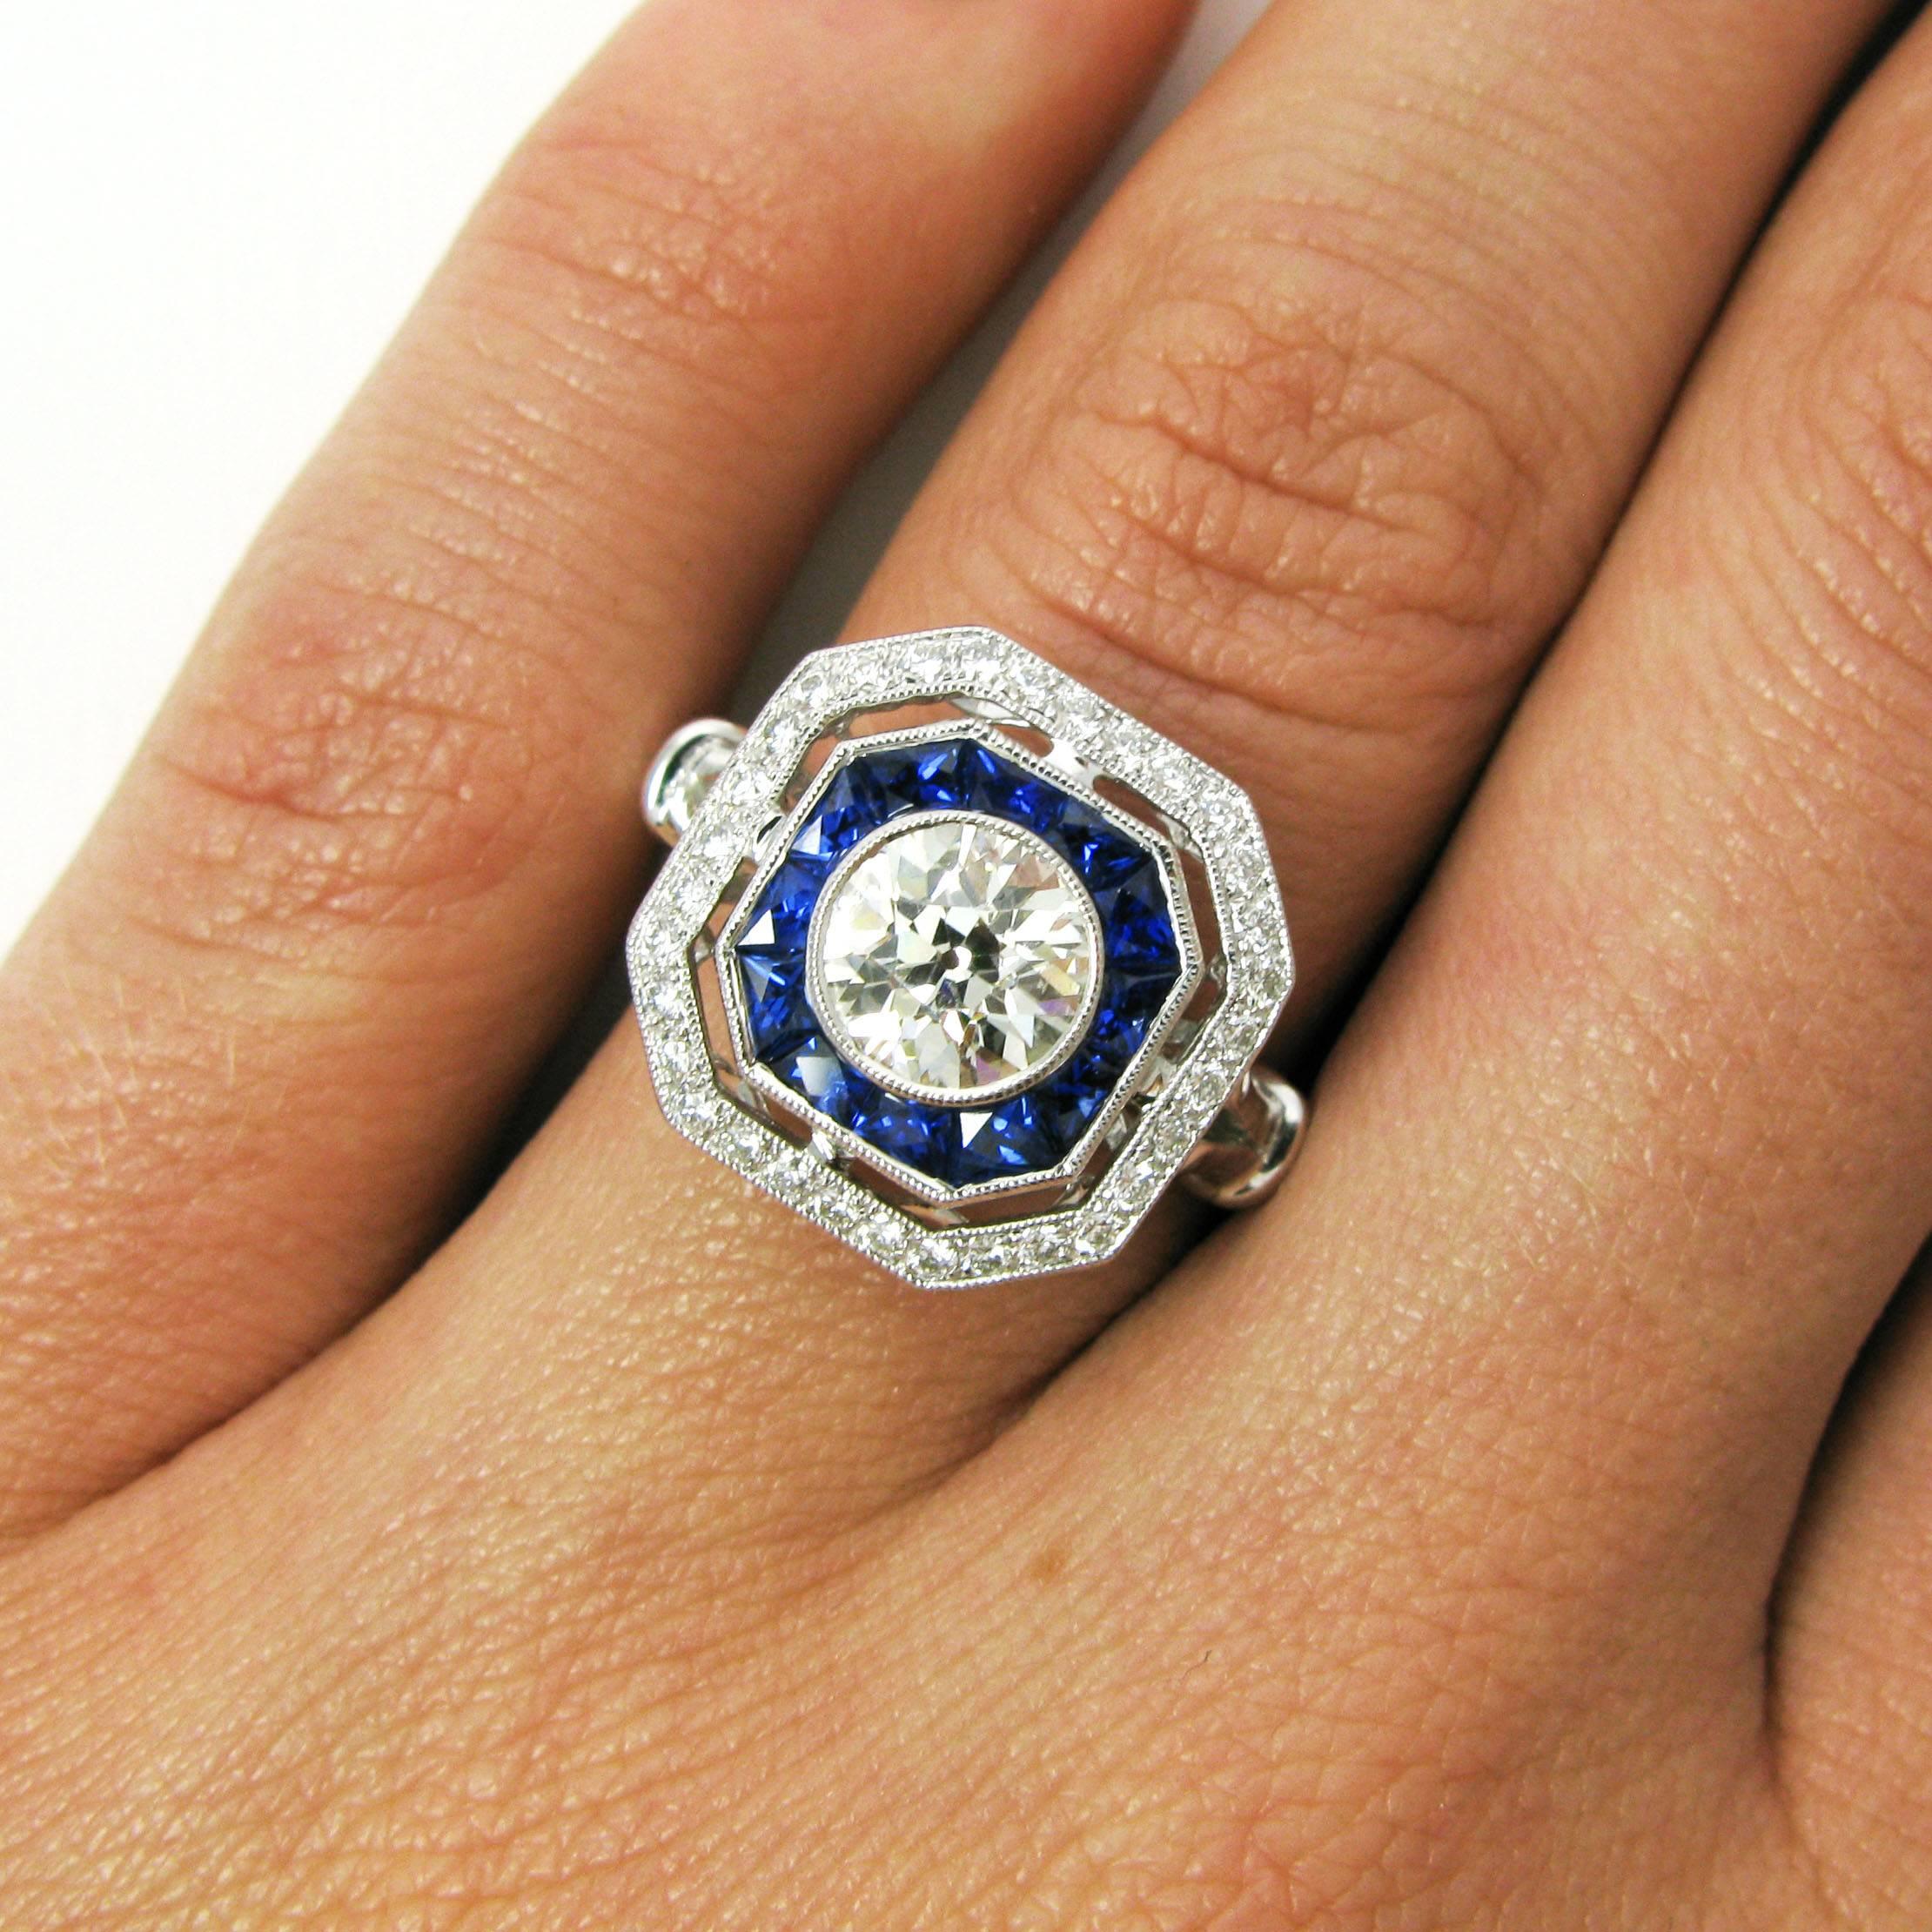 This lovely vintage-inspired ring features a 1.03 carat Old European-cut diamond bezel set into a custom calibre cut sapphire frame surrounded by a pave diamond frame. Set low on a split shank with an elaborate gallery and pierced and milgrain